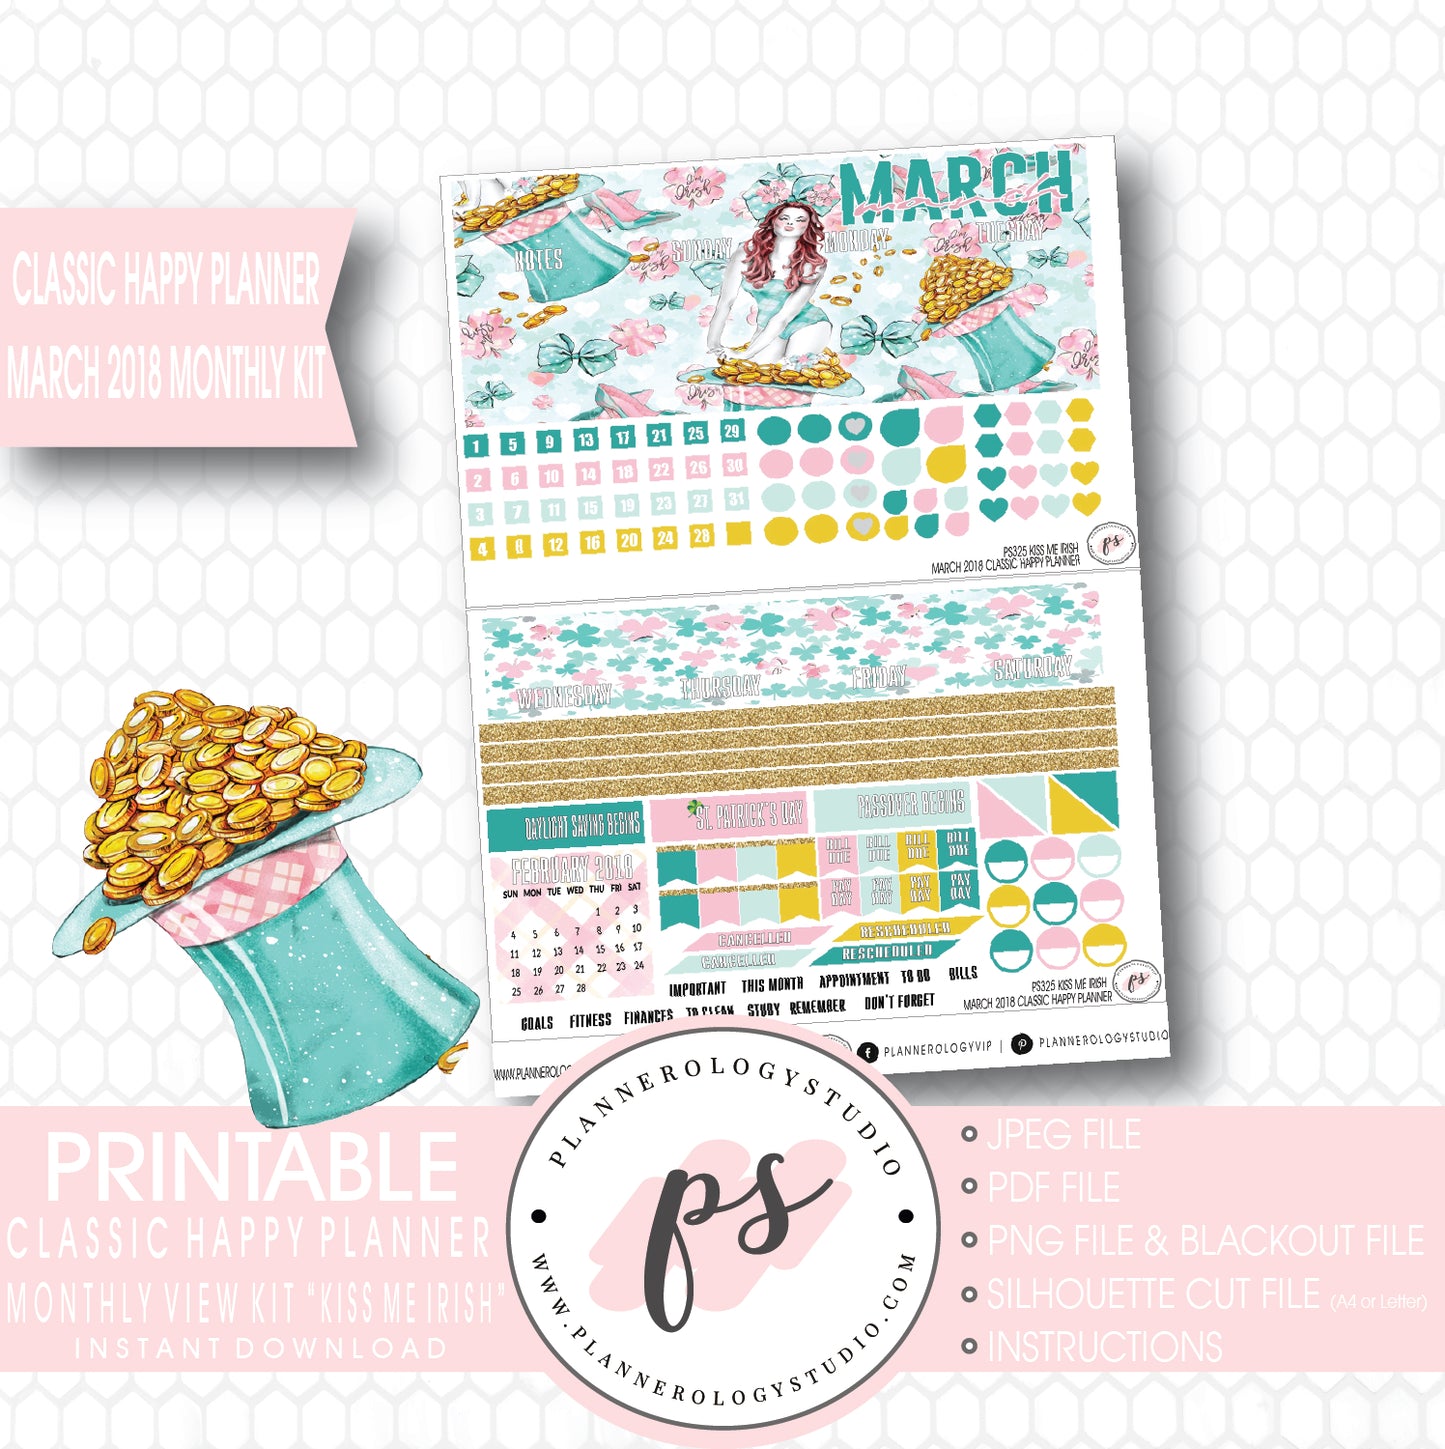 Kiss Me Irish St. Patrick's Day March 2018 Monthly View Kit Digital Printable Planner Stickers (for use with Classic Happy Planner) - Plannerologystudio